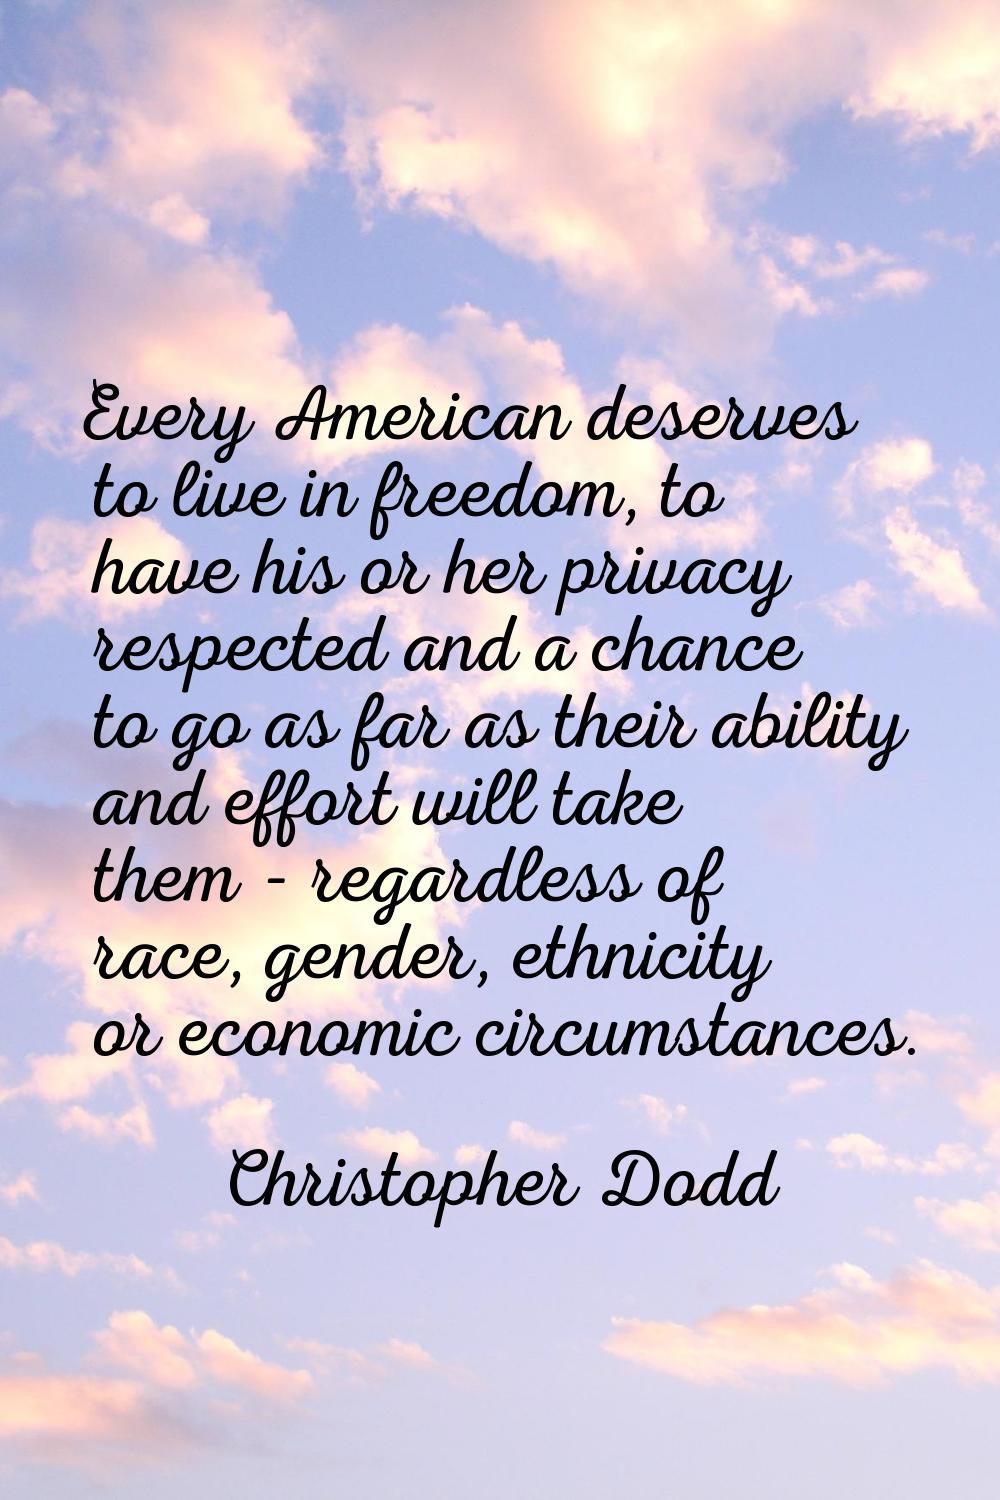 Every American deserves to live in freedom, to have his or her privacy respected and a chance to go